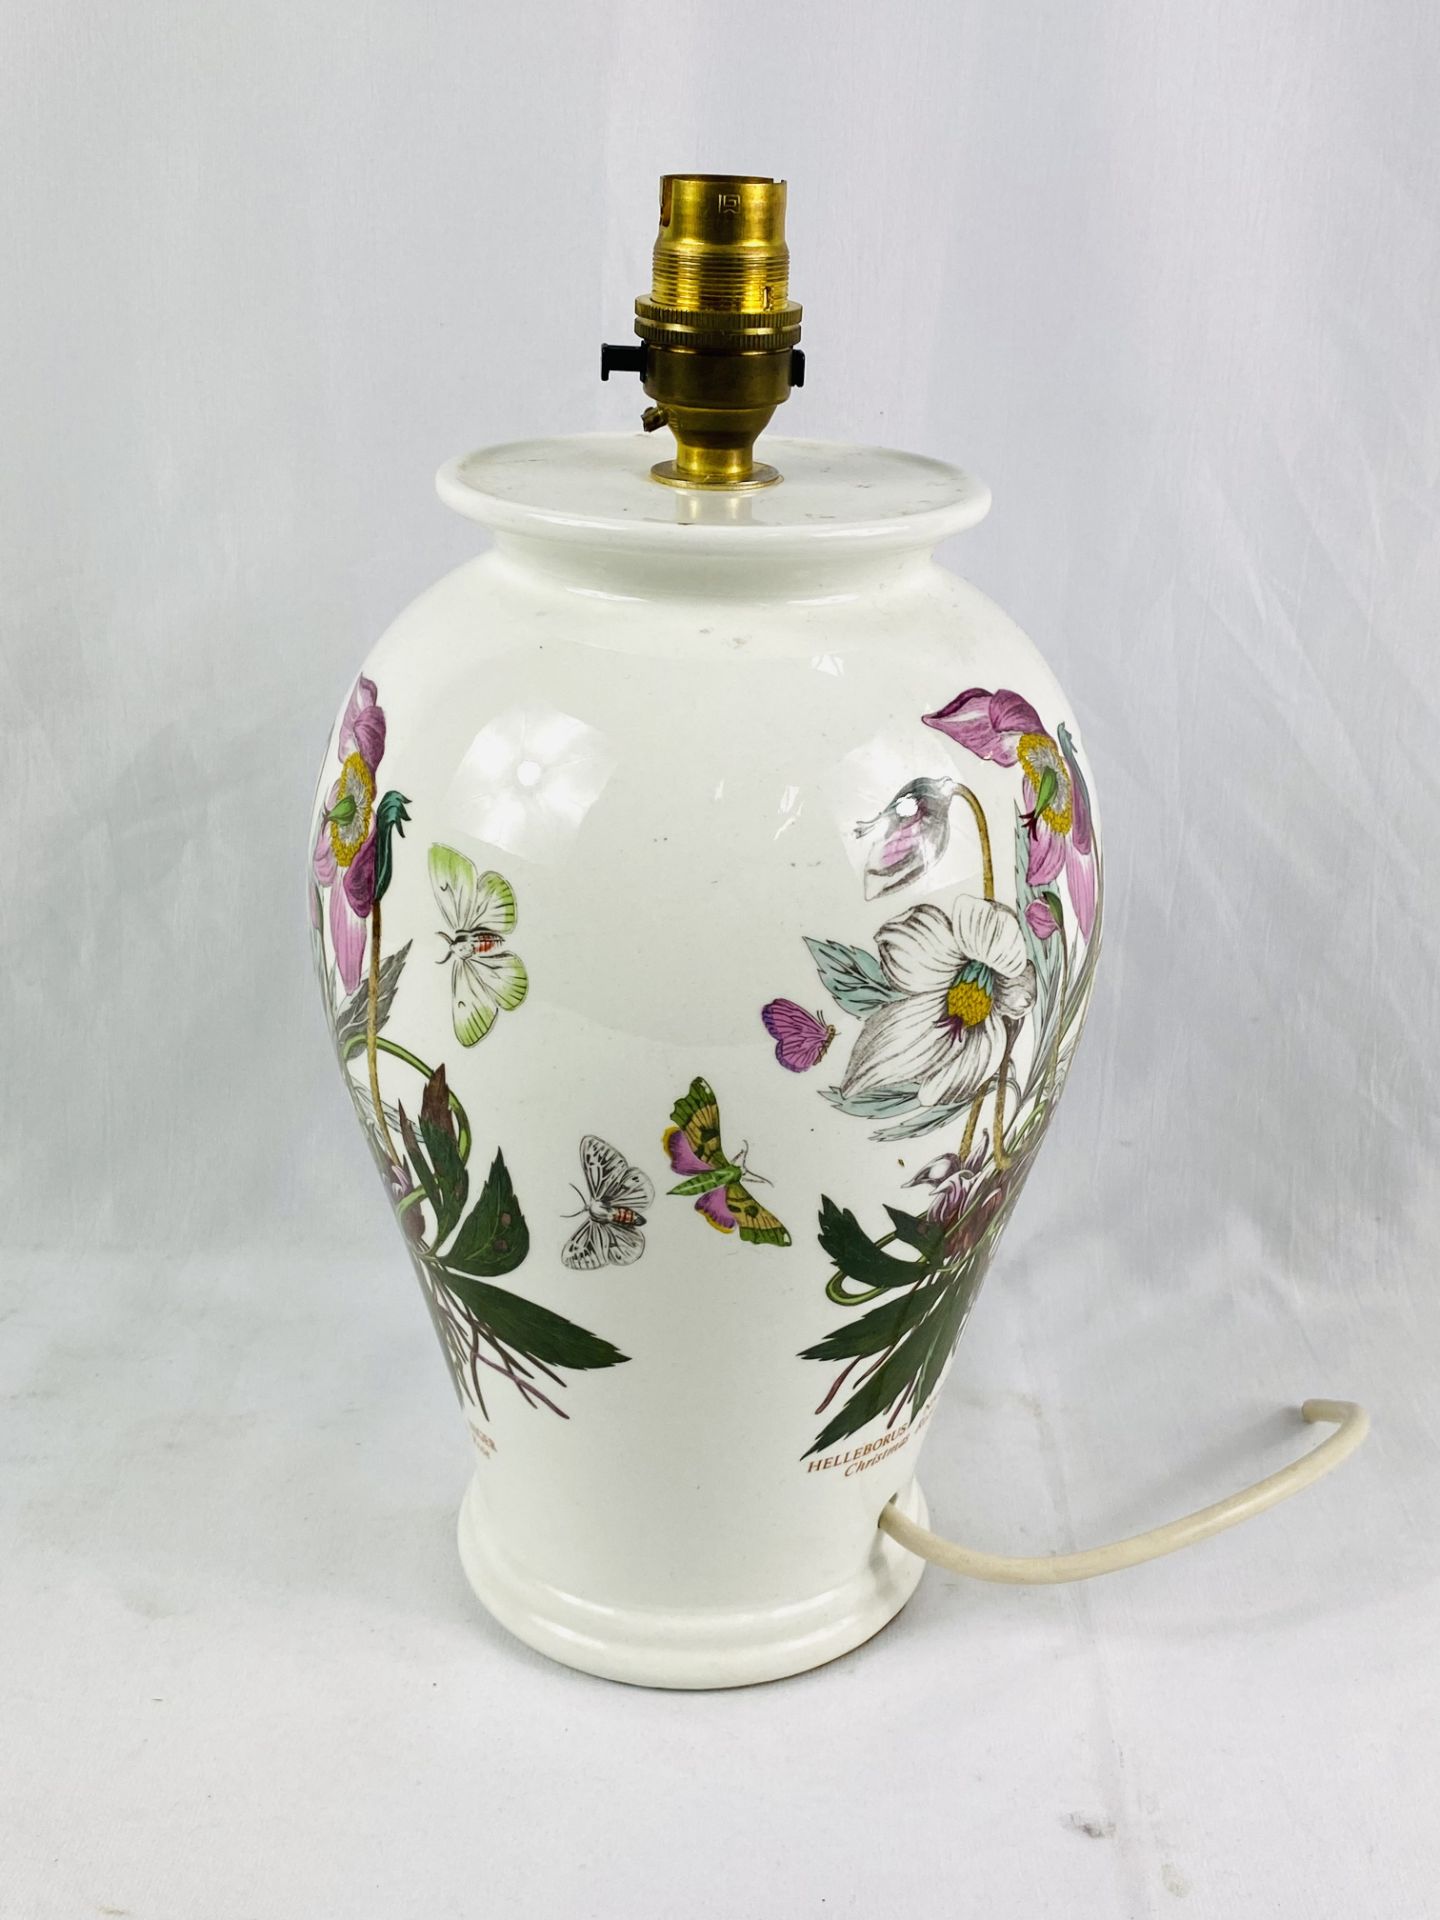 Portmeirion ceramic table lamp - Image 3 of 3